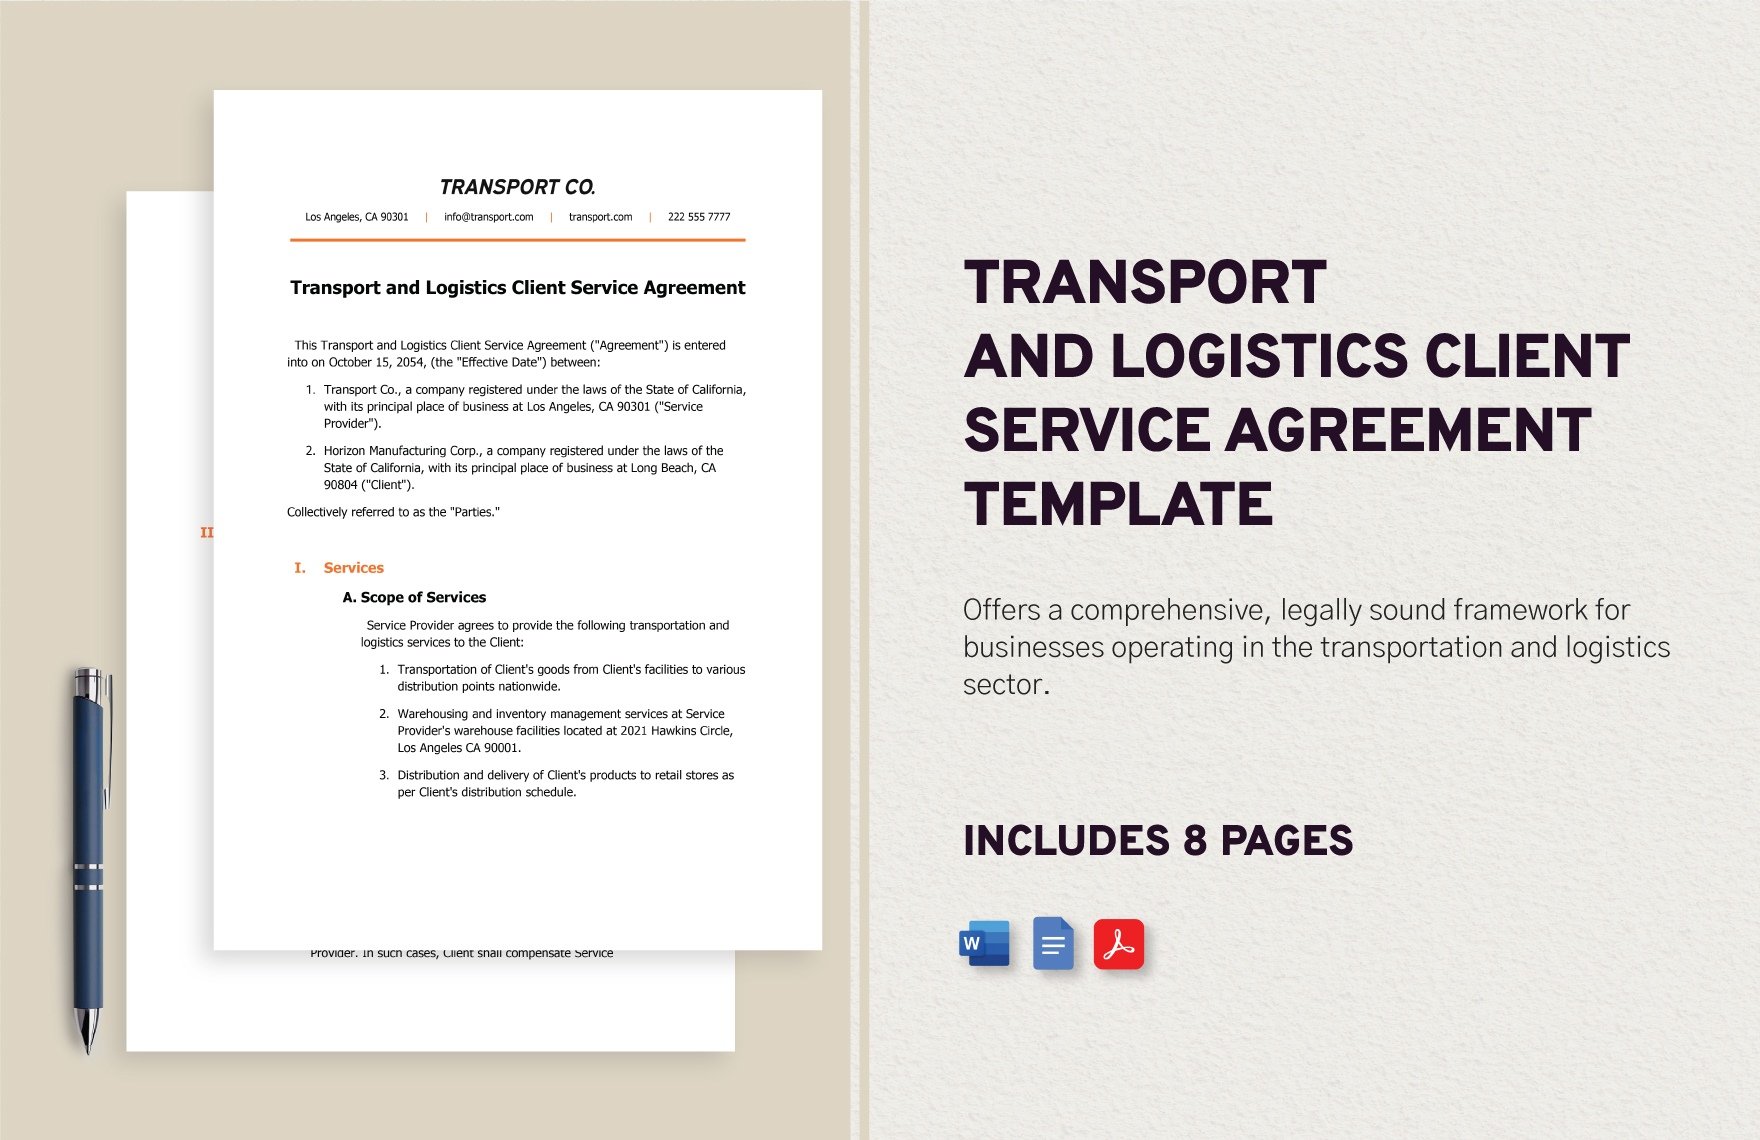 Transport and Logistics Client Service Agreement Template in Word, Google Docs, PDF